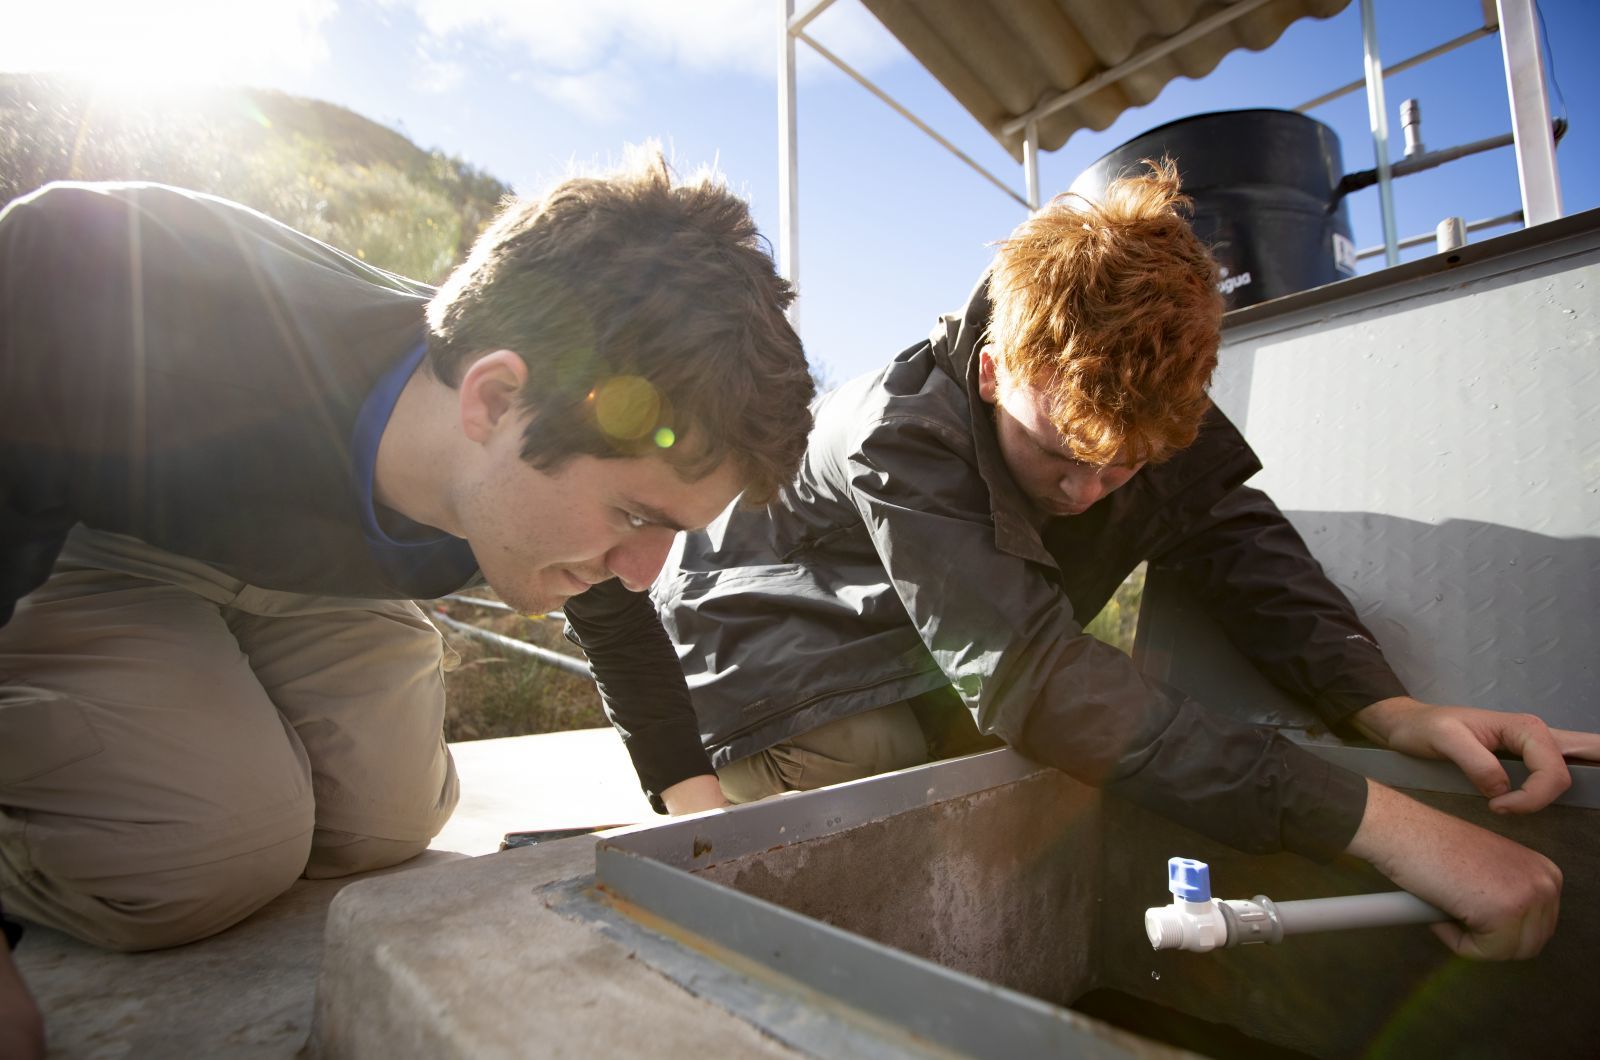 Two students building a water tank while away on a study abroad project.